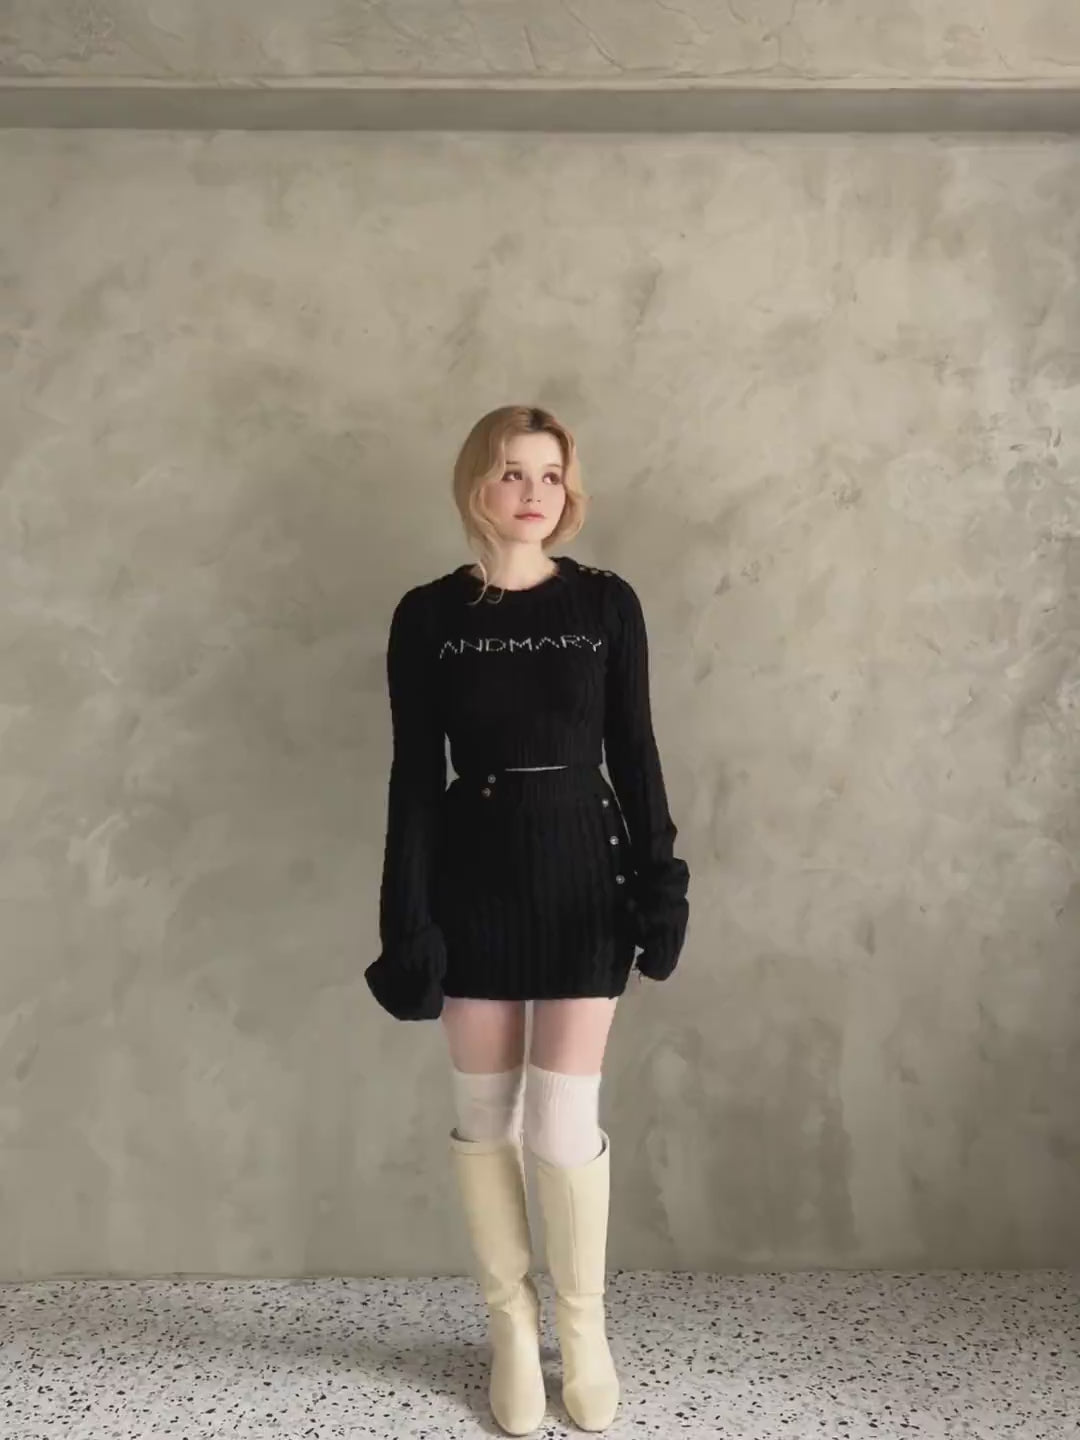 Marie knit set up blackマリーニットセットアップ - その他